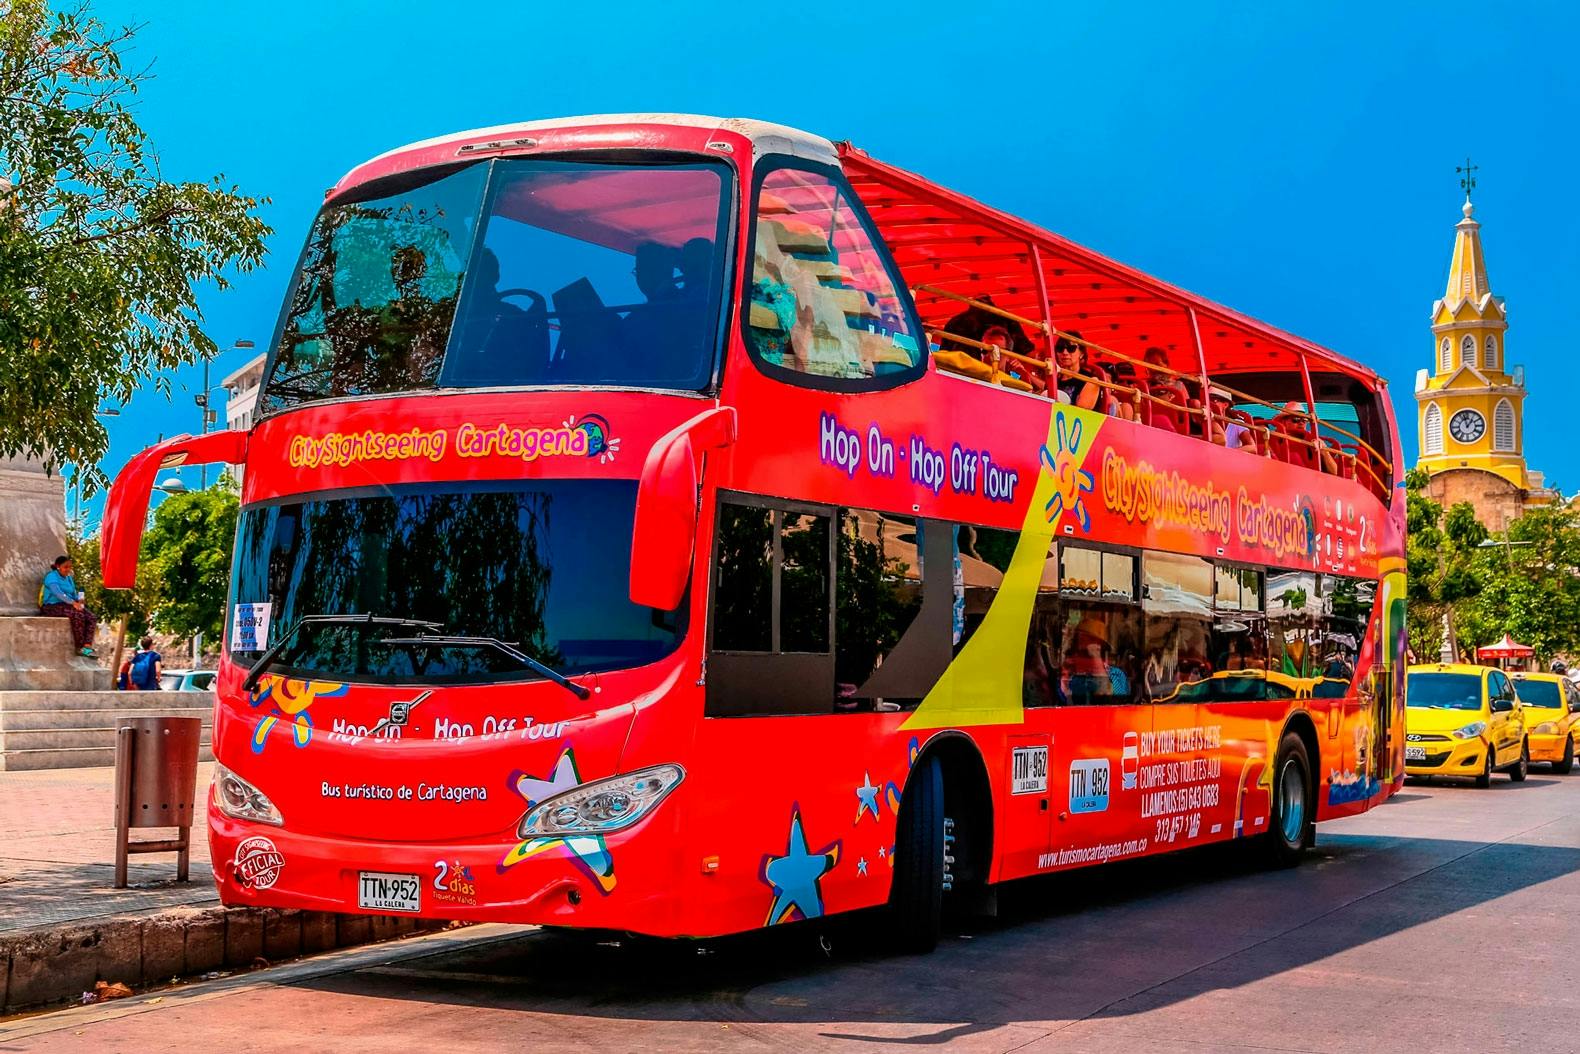 City Sightseeing hop-on hop-off bus tour of Cartagena